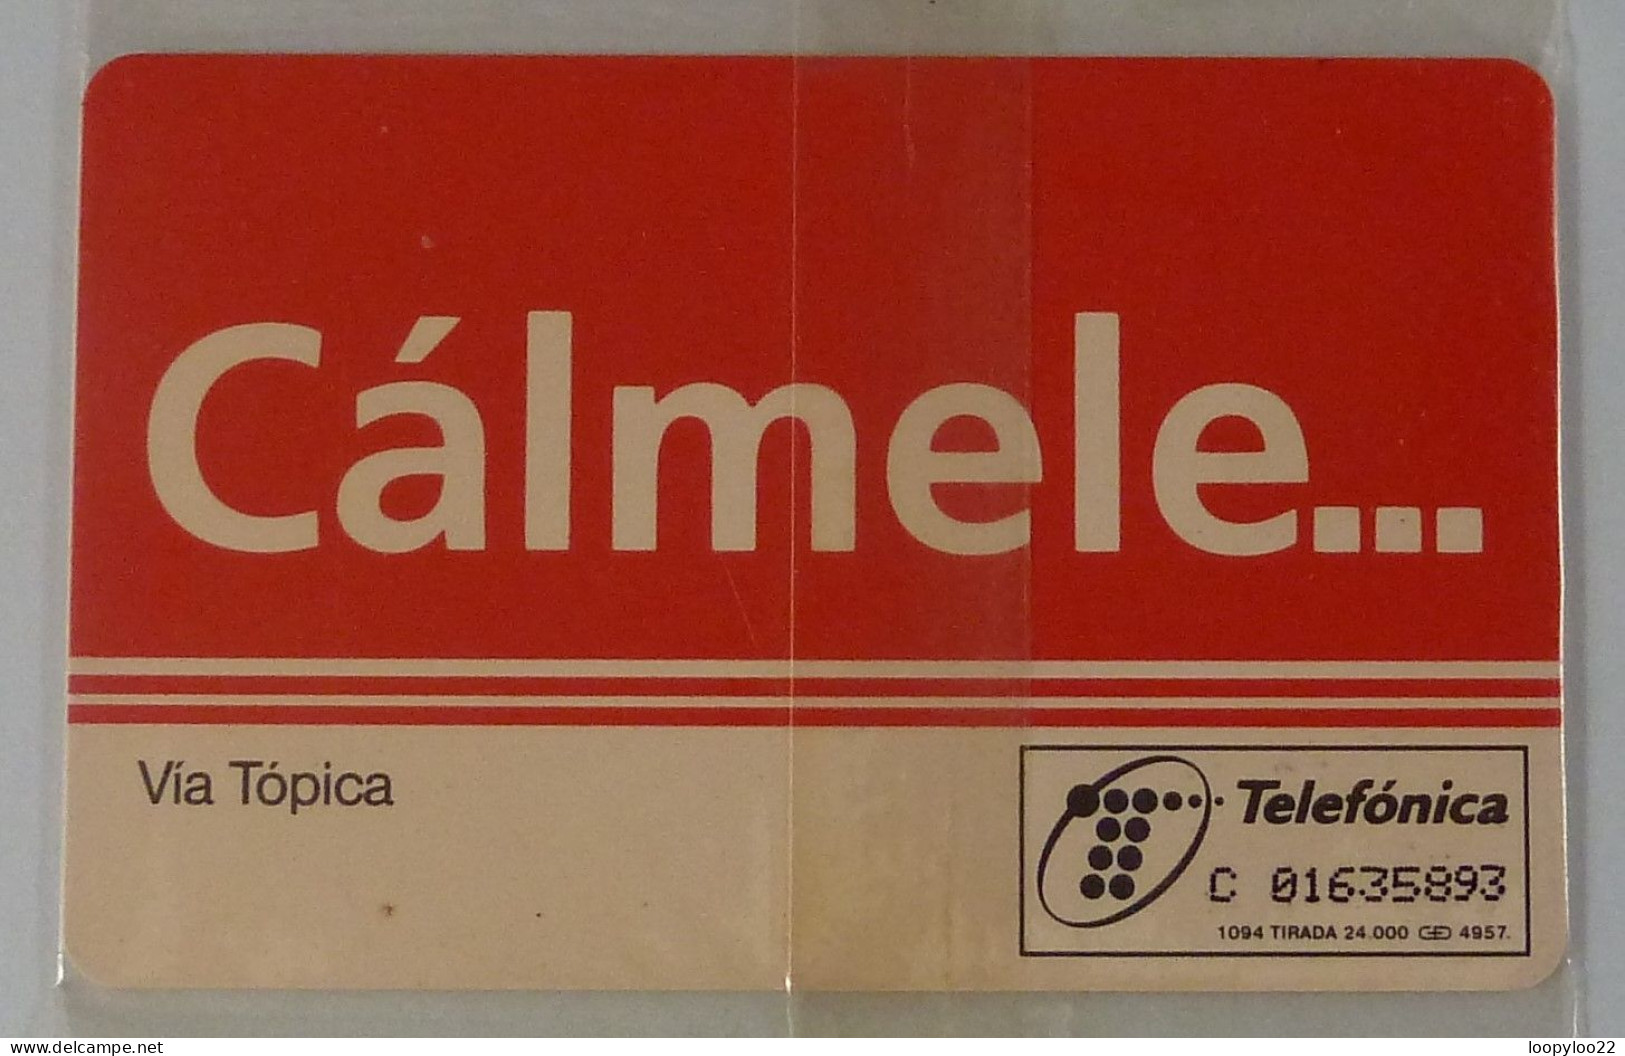 SPAIN - Chip - 100 Units - P-097- Calmele - Mint Blister - Private Issues